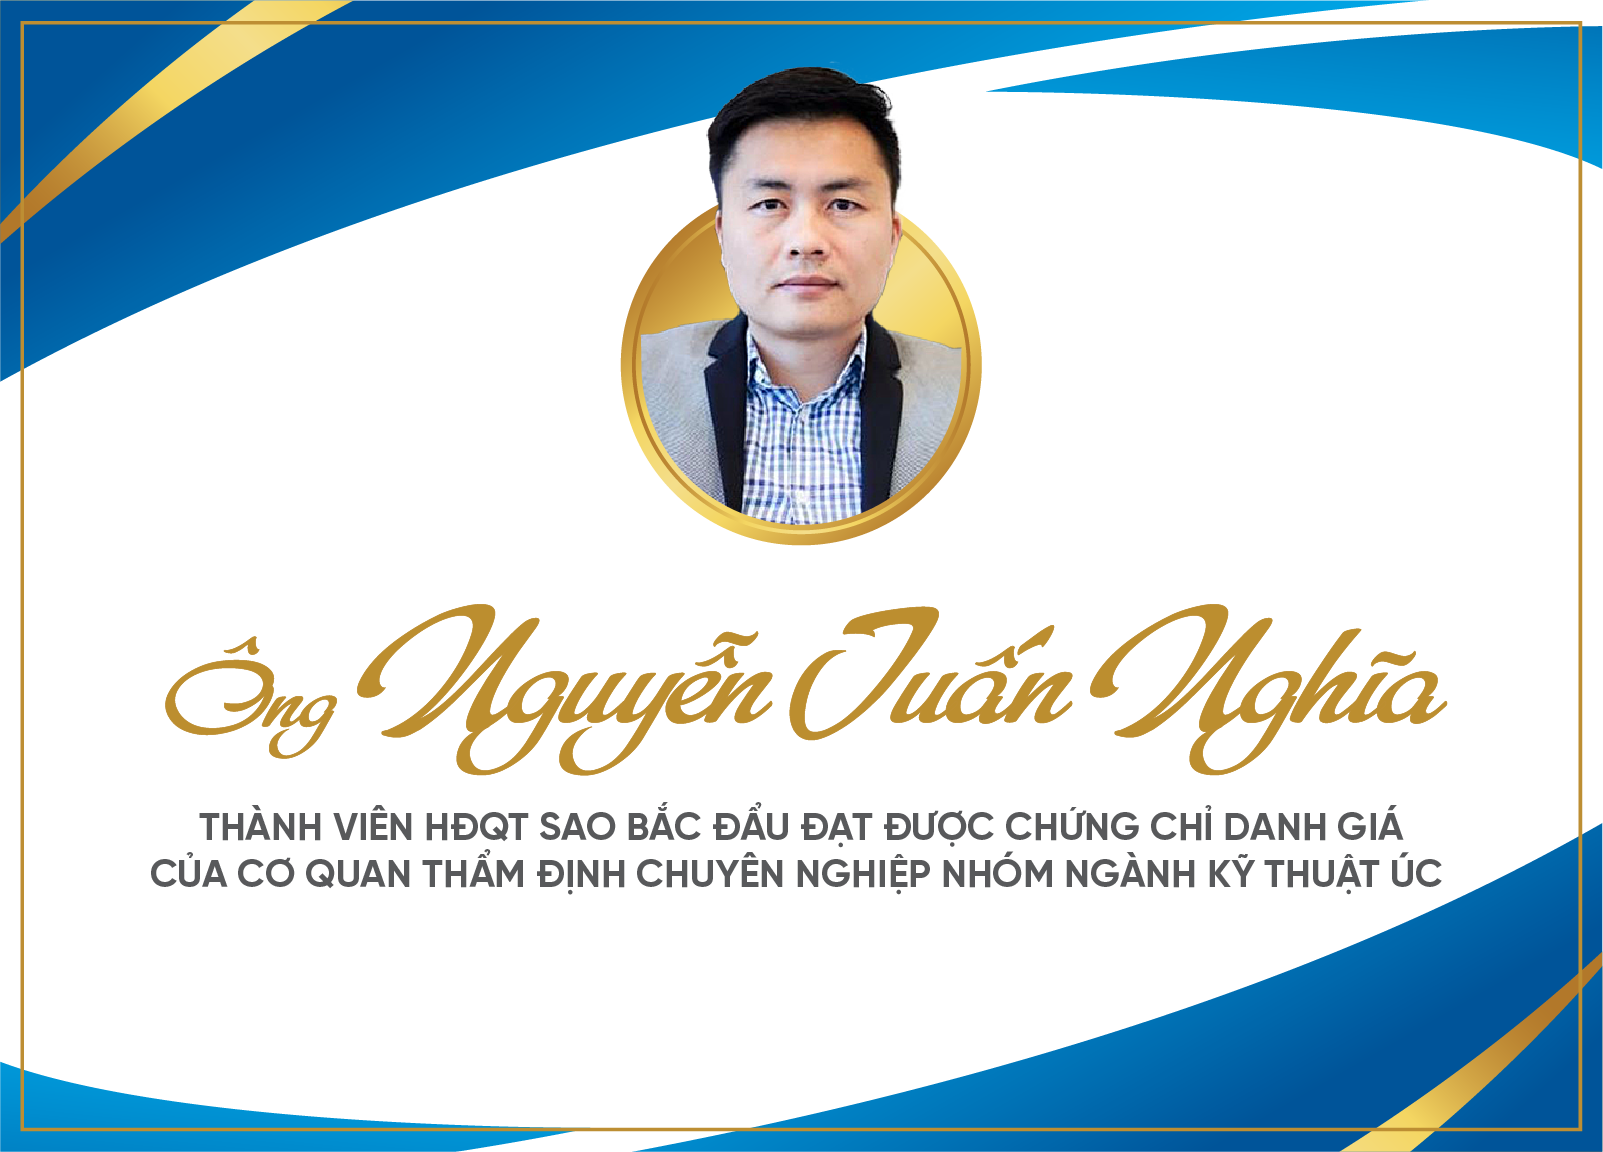 Mr. Nguyen Tuan Nghia – Member of the Board of Directors of Sao Bac Dau Corp. obtained the prestigious Certificate of the Professional Assessment Authority of the Australian Engineering Sector